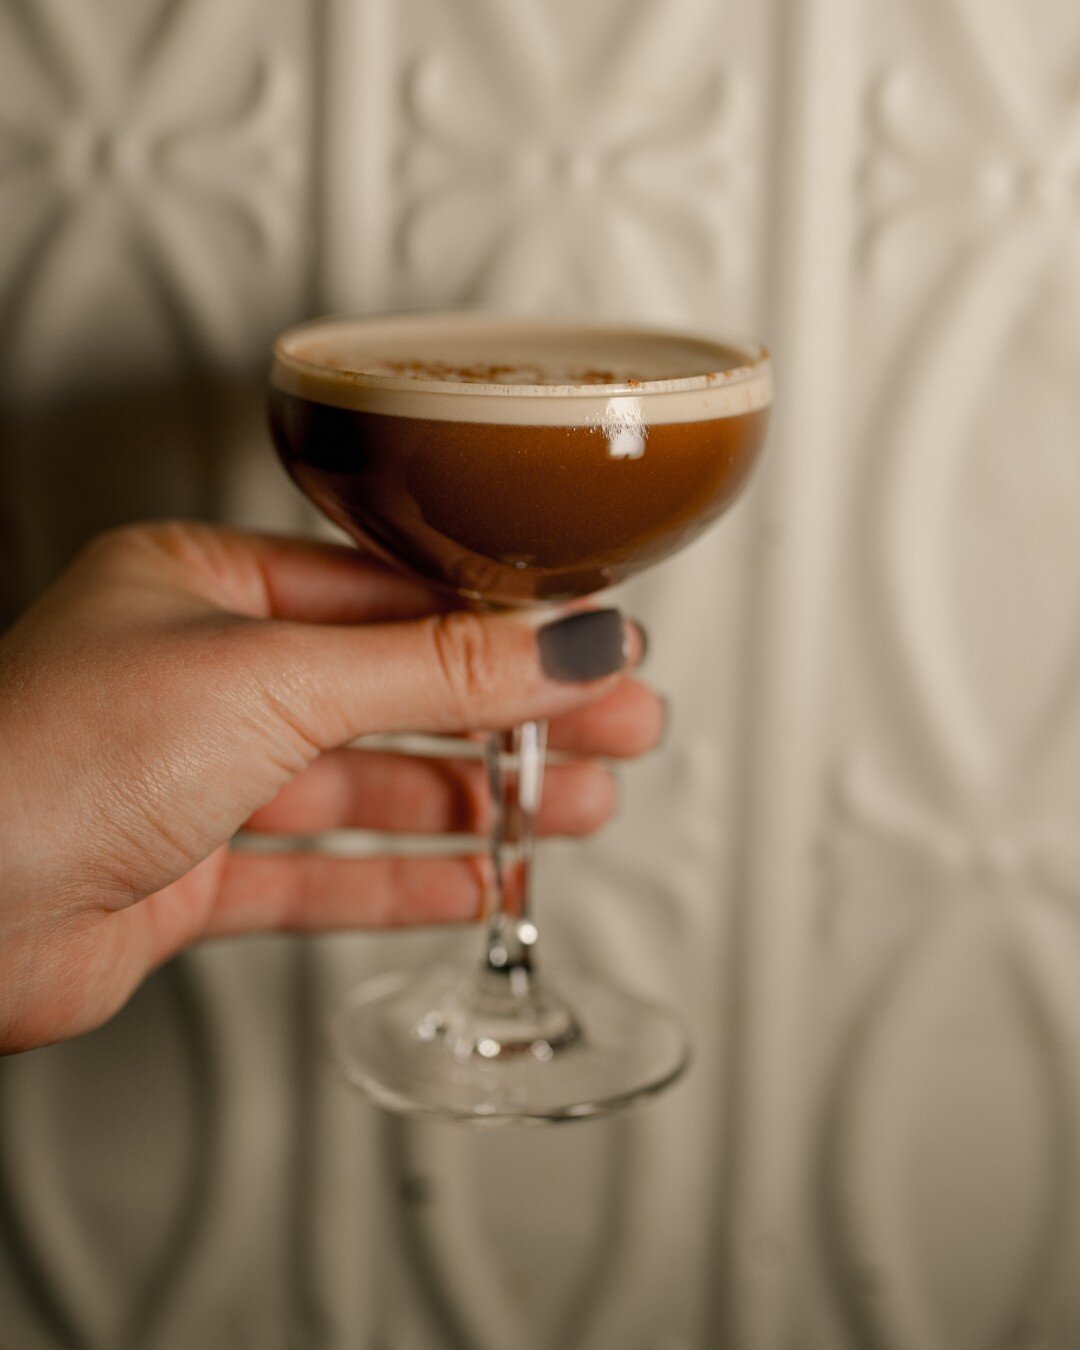 Did someone say Espresso Martini???
.
.
.
#thebarrowhouse #clifton #cliftonnj #northjersey #eatlocal #supportlocal #drinklocal #njbars #barfood #colonial #rustic #farmhouse #craftcocktails